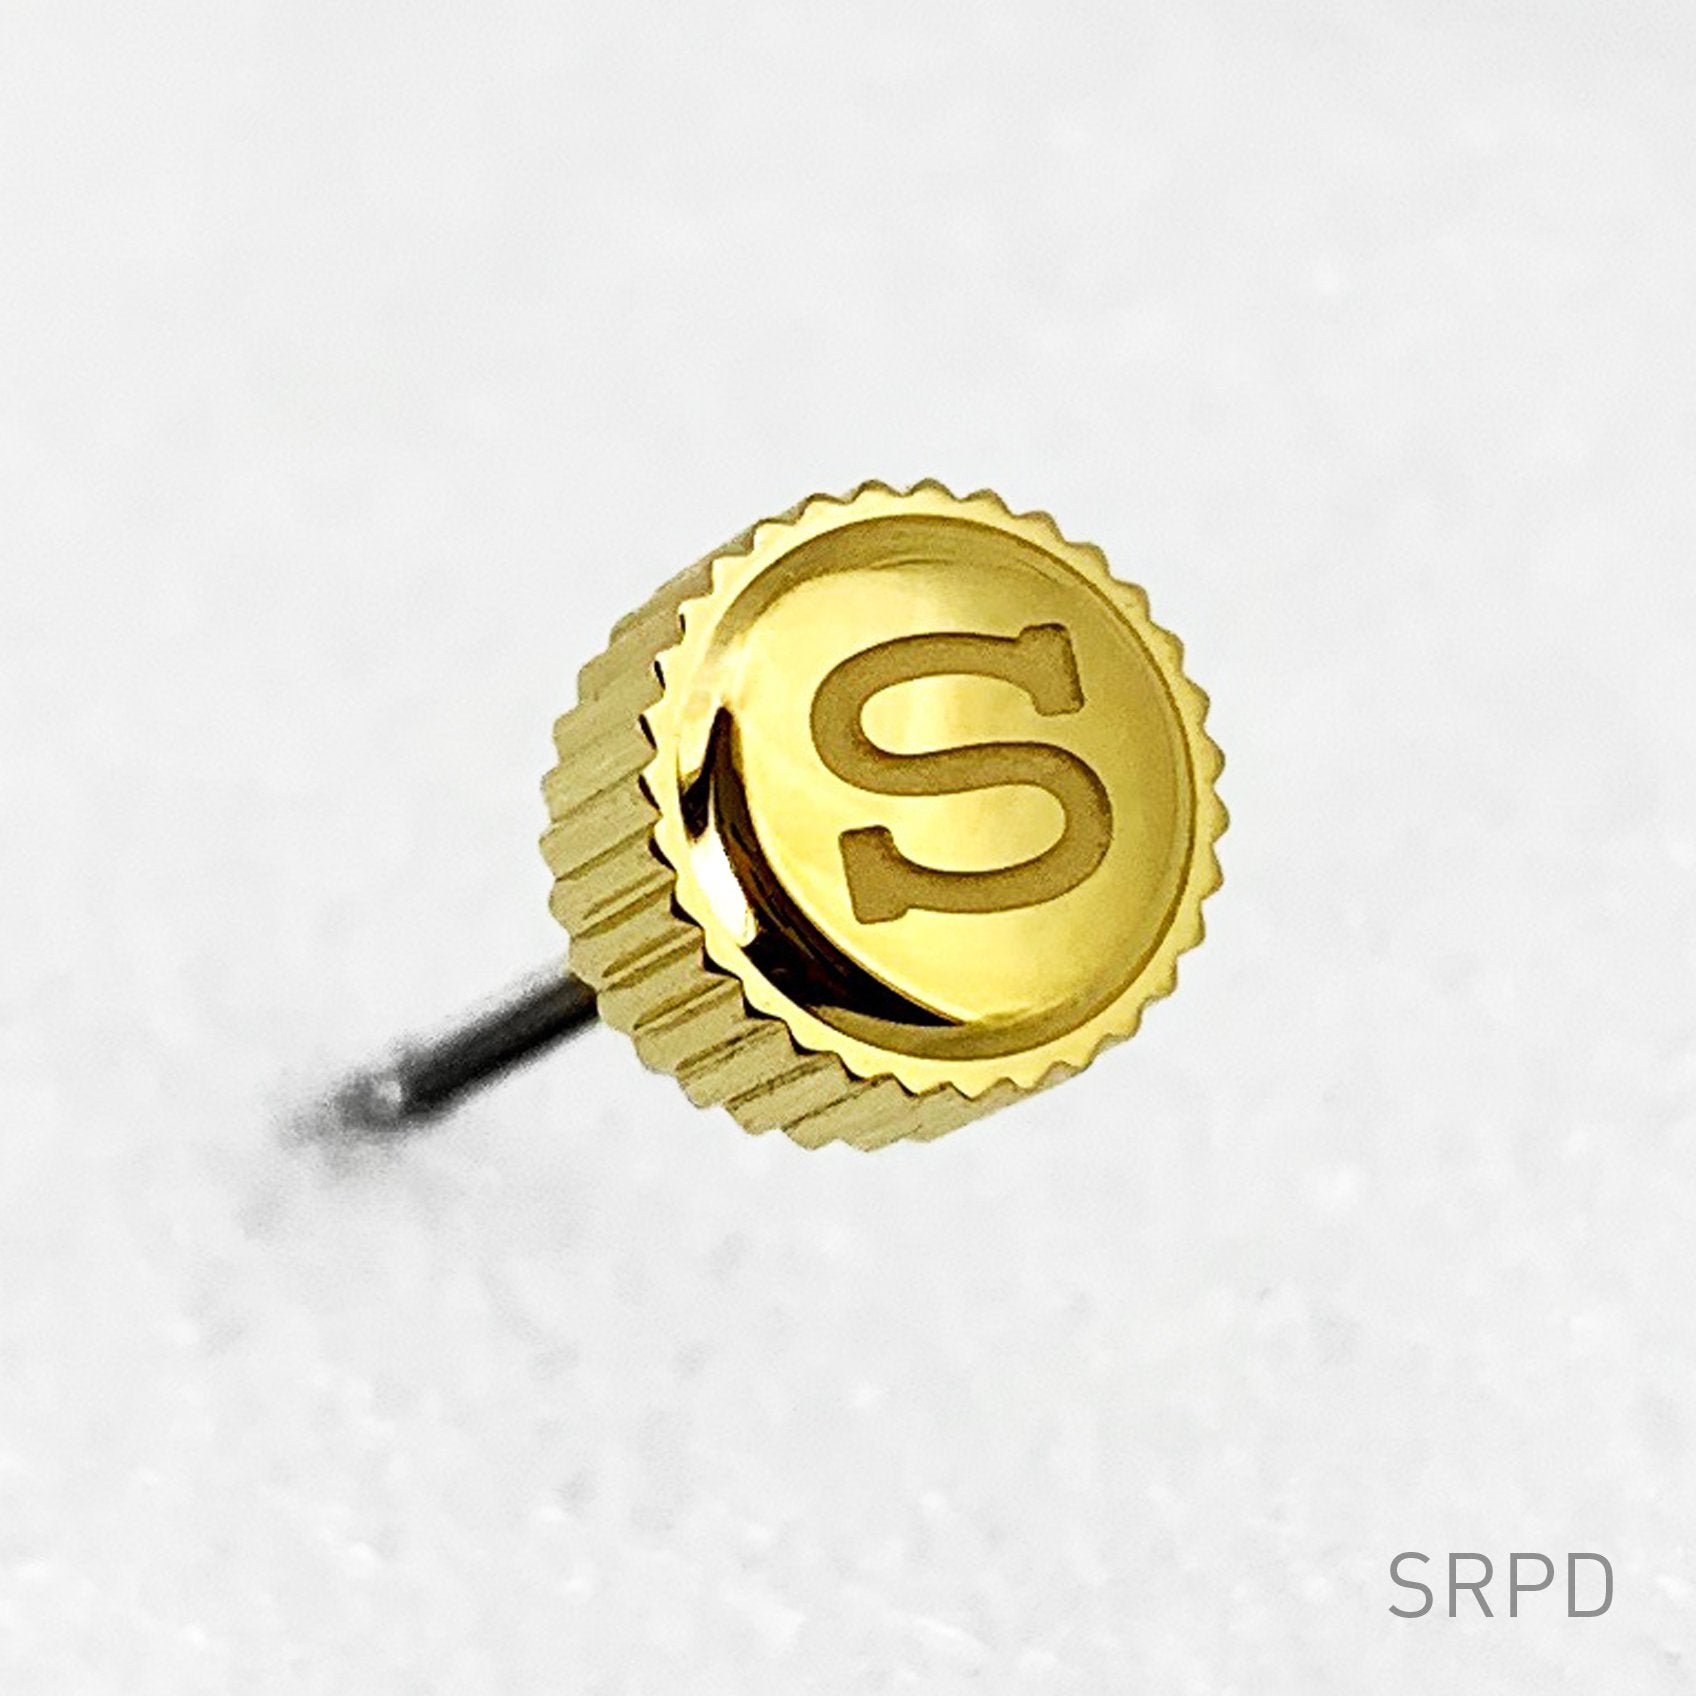 Crown - SRPD - Polished PVD Gold - "S"